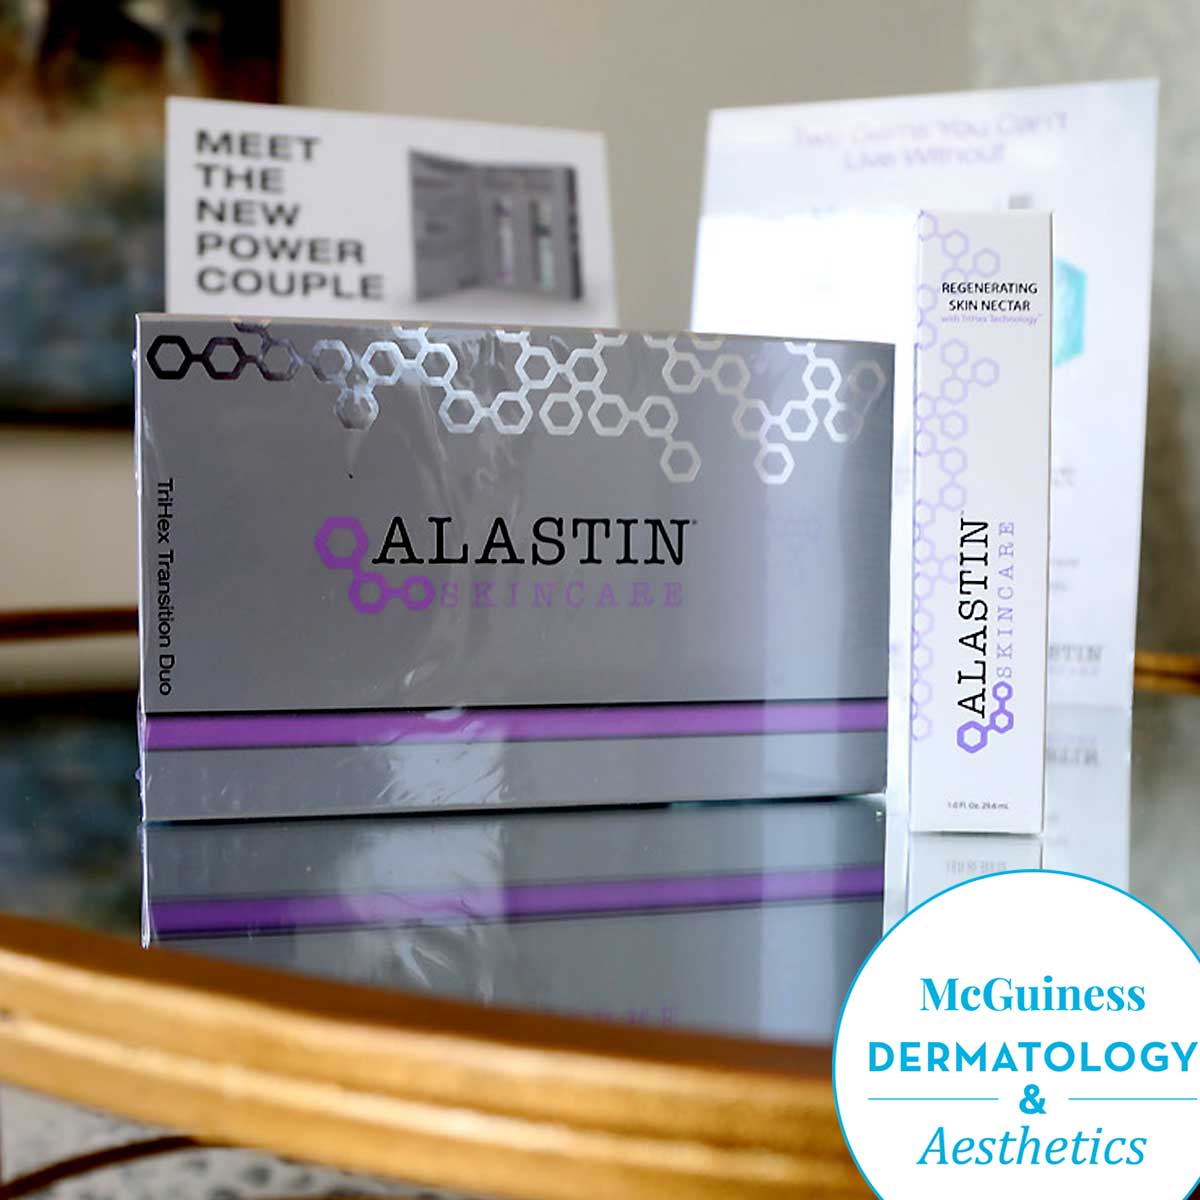 ALASTIN Skincare® is the fastest-growing physician-dispensed skincare brand, with innovative, scientifically proven and clinically tested products. 
.
.
.
#alastin #alastinskincare #sunscreen #spf #tintedspf #tintedsunscreen #bestsunscreen